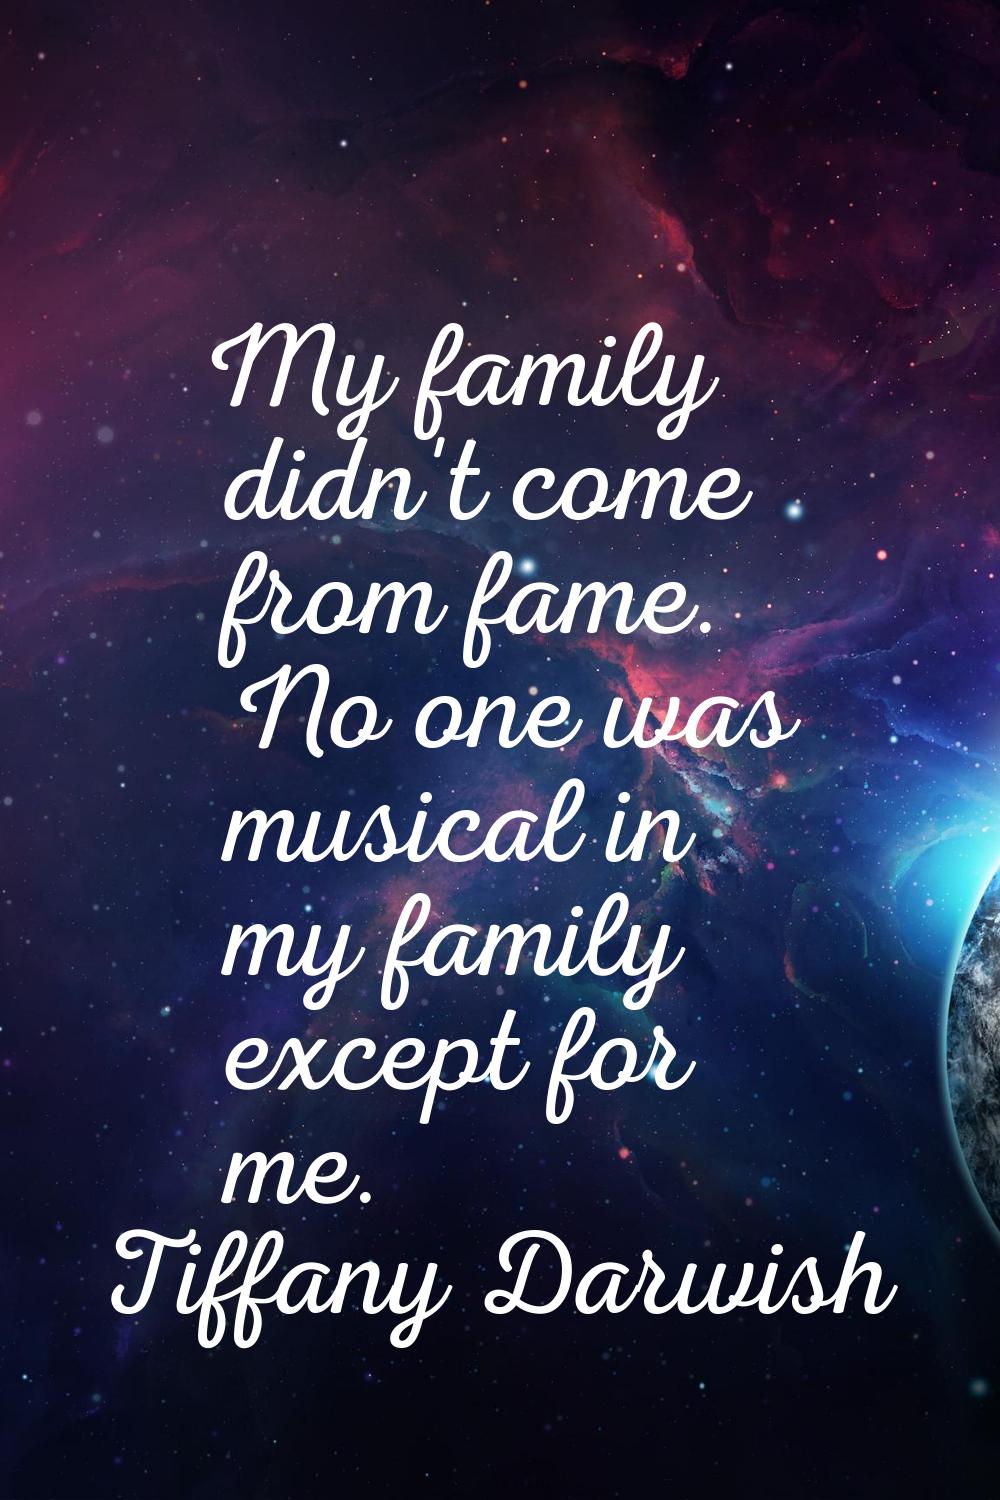 My family didn't come from fame. No one was musical in my family except for me.